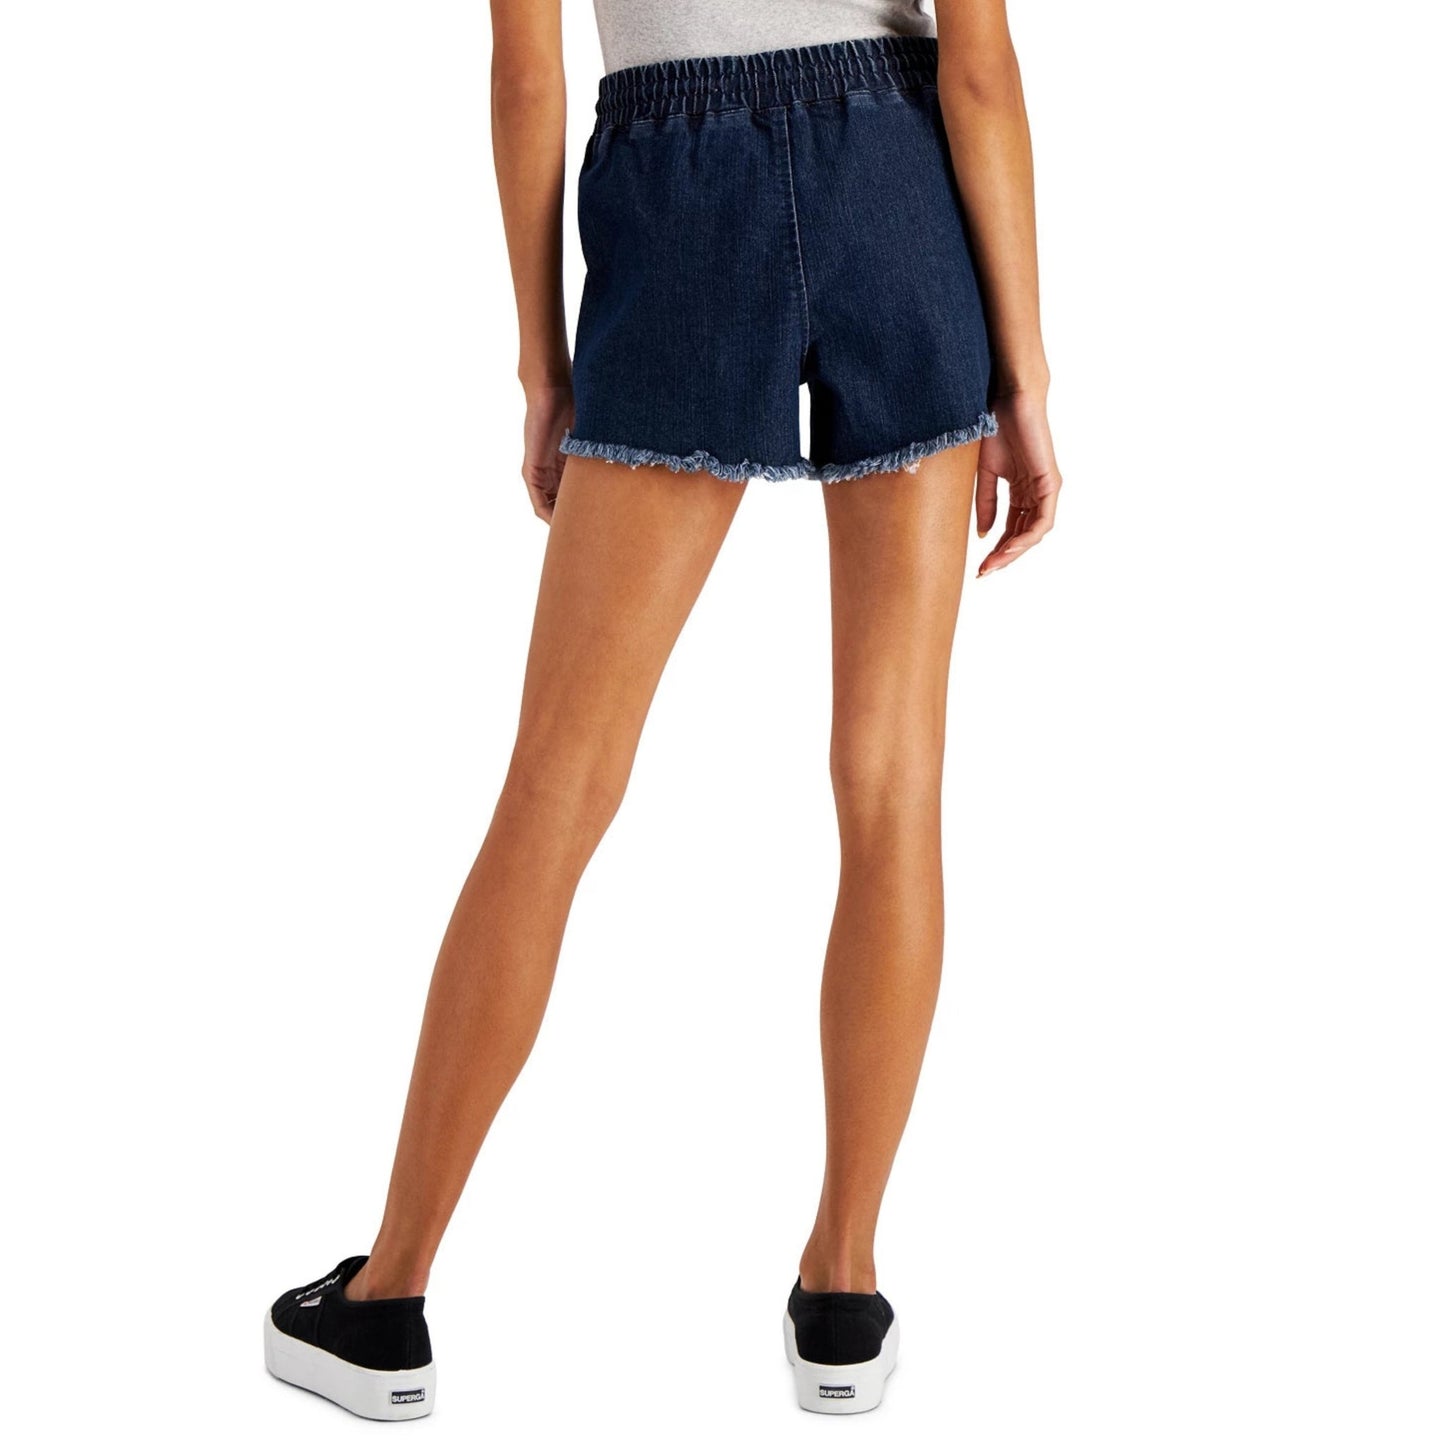 Tinseltown Juniors Tie-Front Pull-On Shorts for Women, Blue, Size: XS